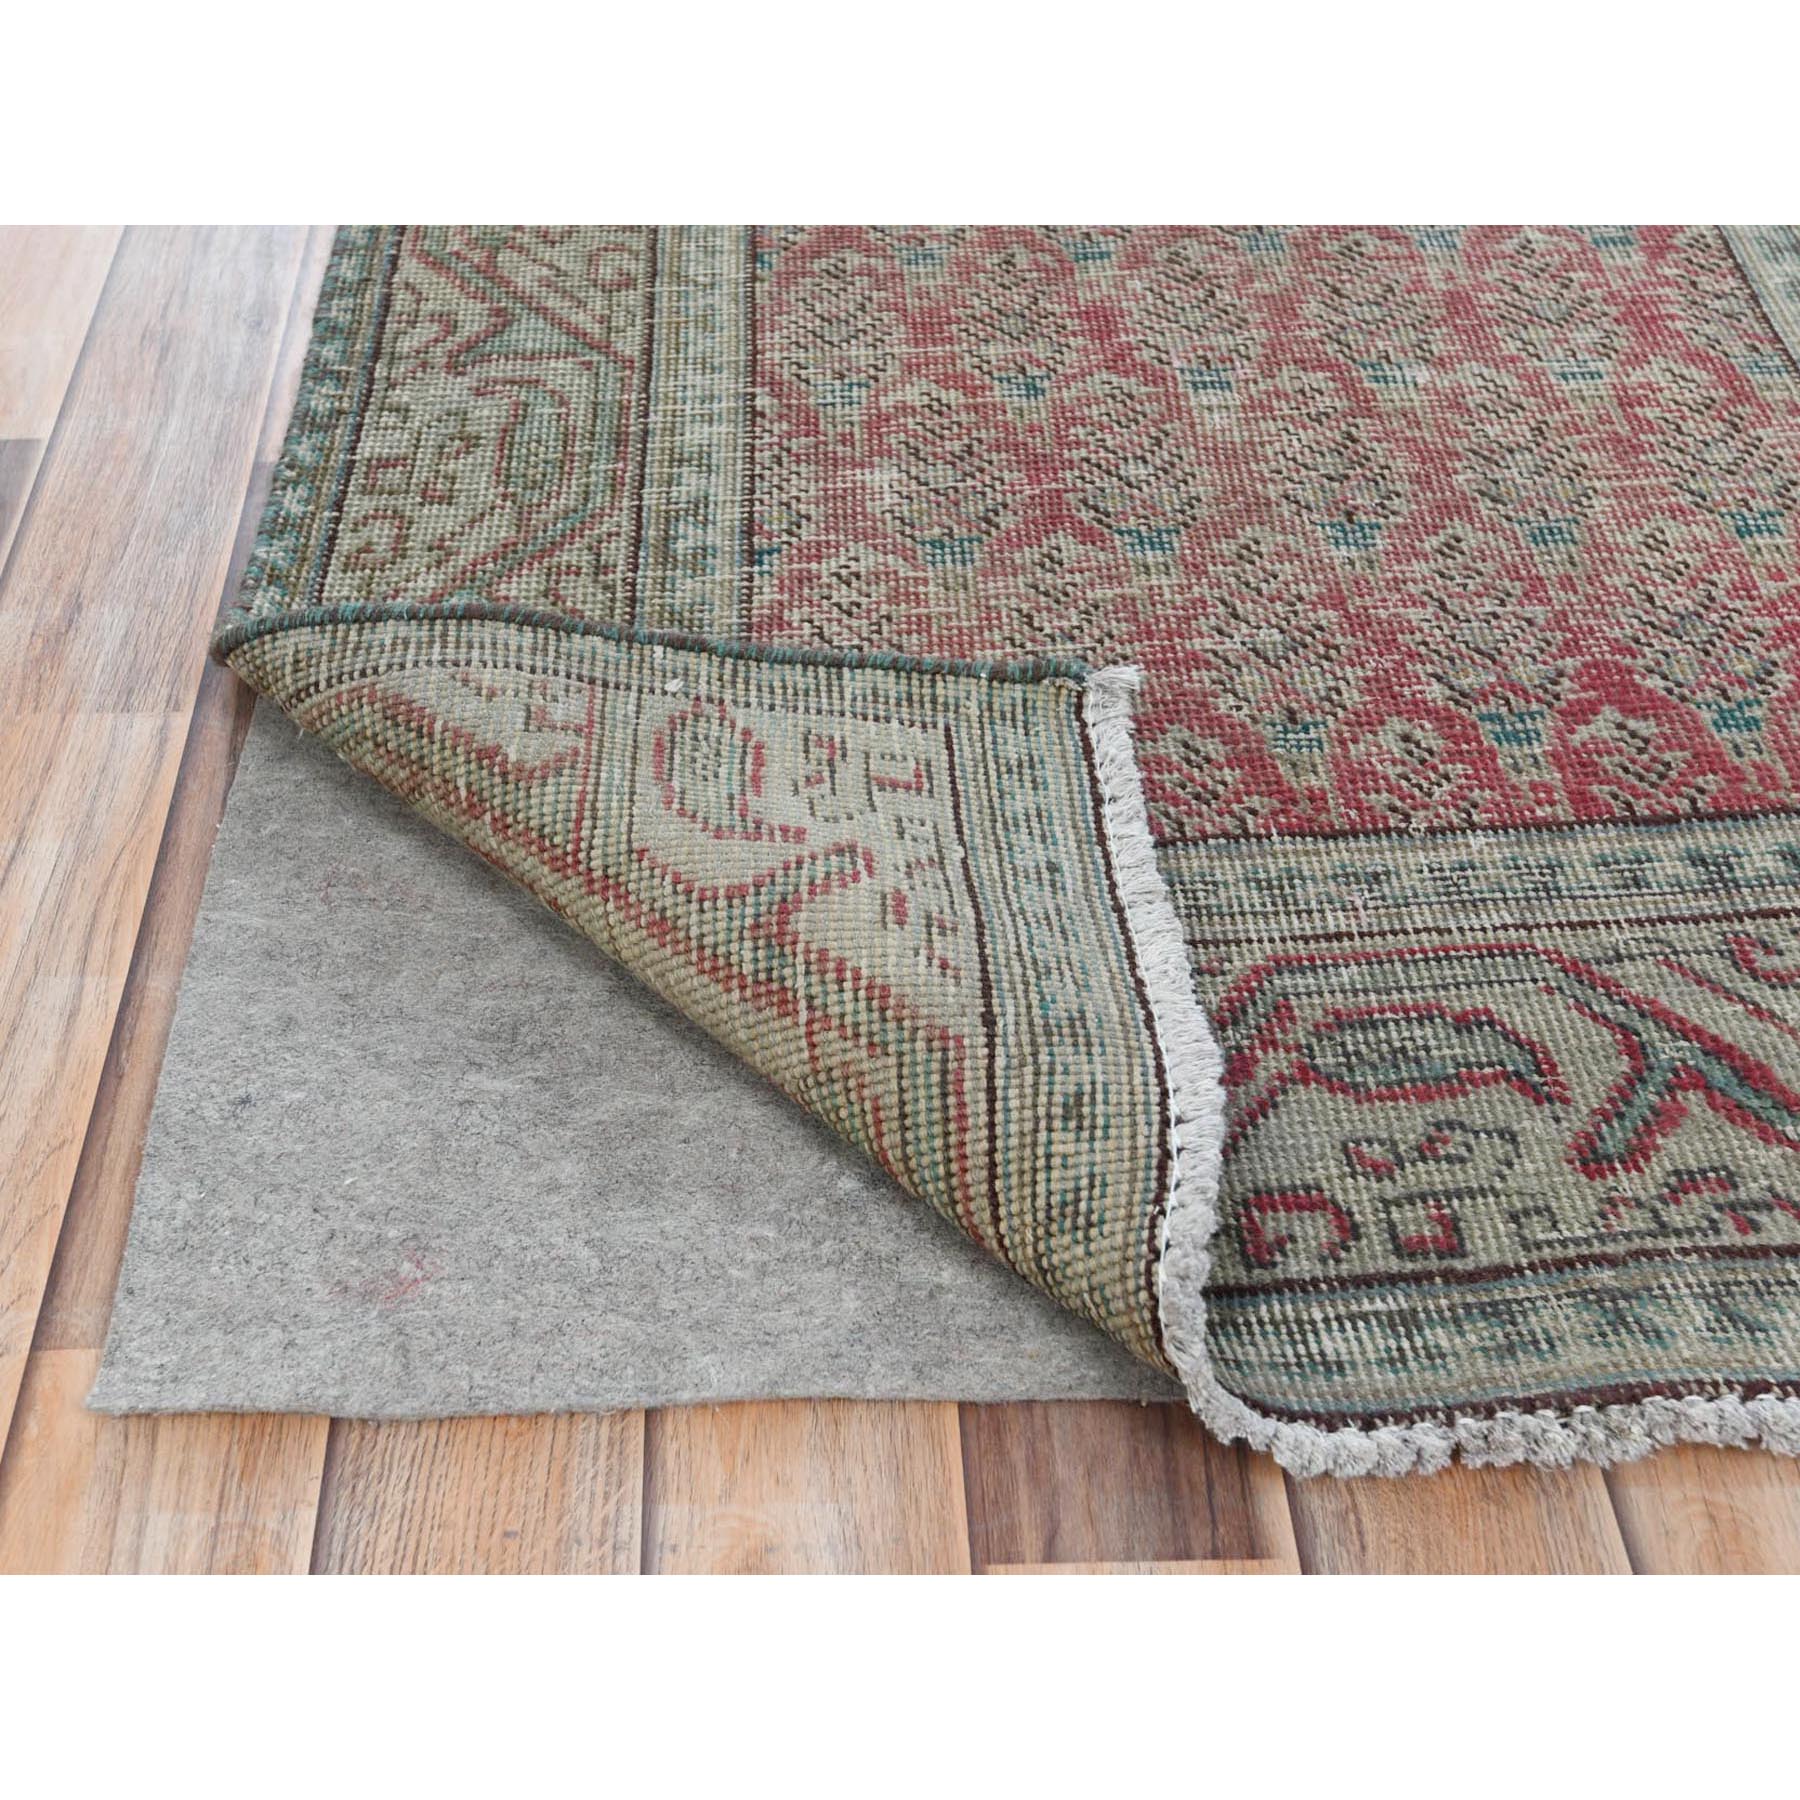 3'1"x12'4" Faded Red, Worn Down Vintage Persian Tabriz with Small Tree Repetitive Design, Hand Woven, Distressed Pure Wool Runner Oriental Rug 